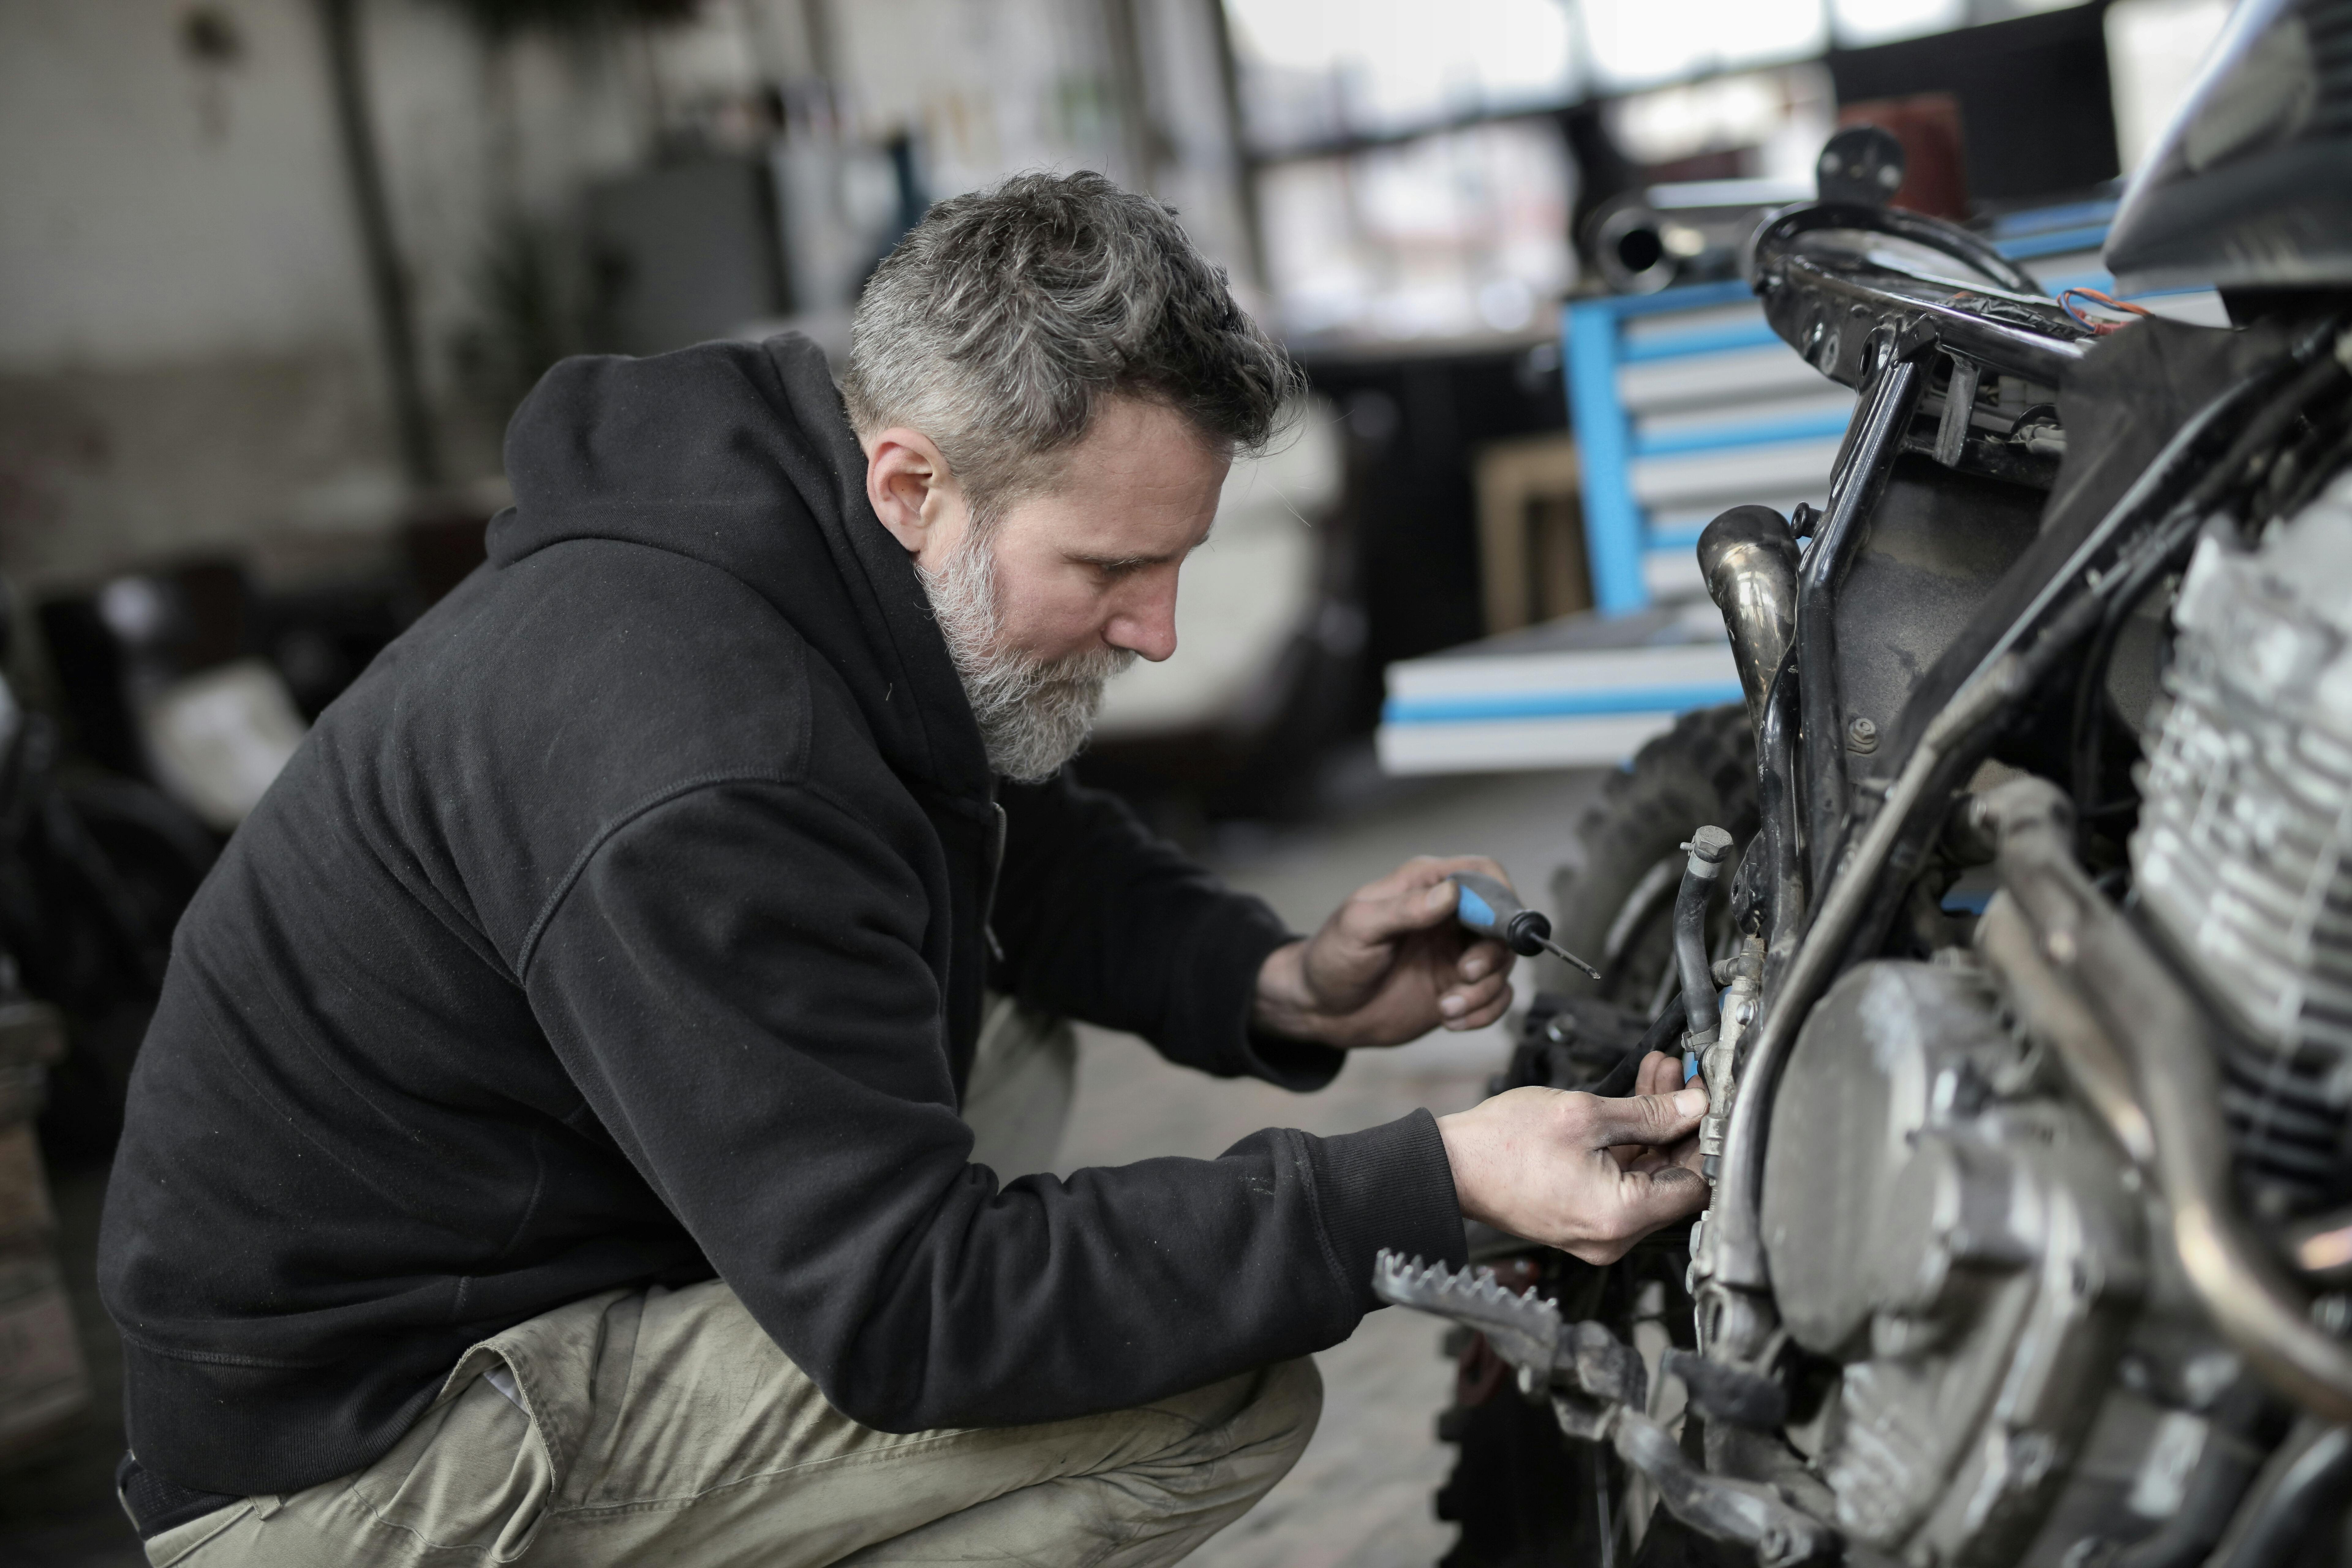 A man fixing a motorcycle | Source: Pexels